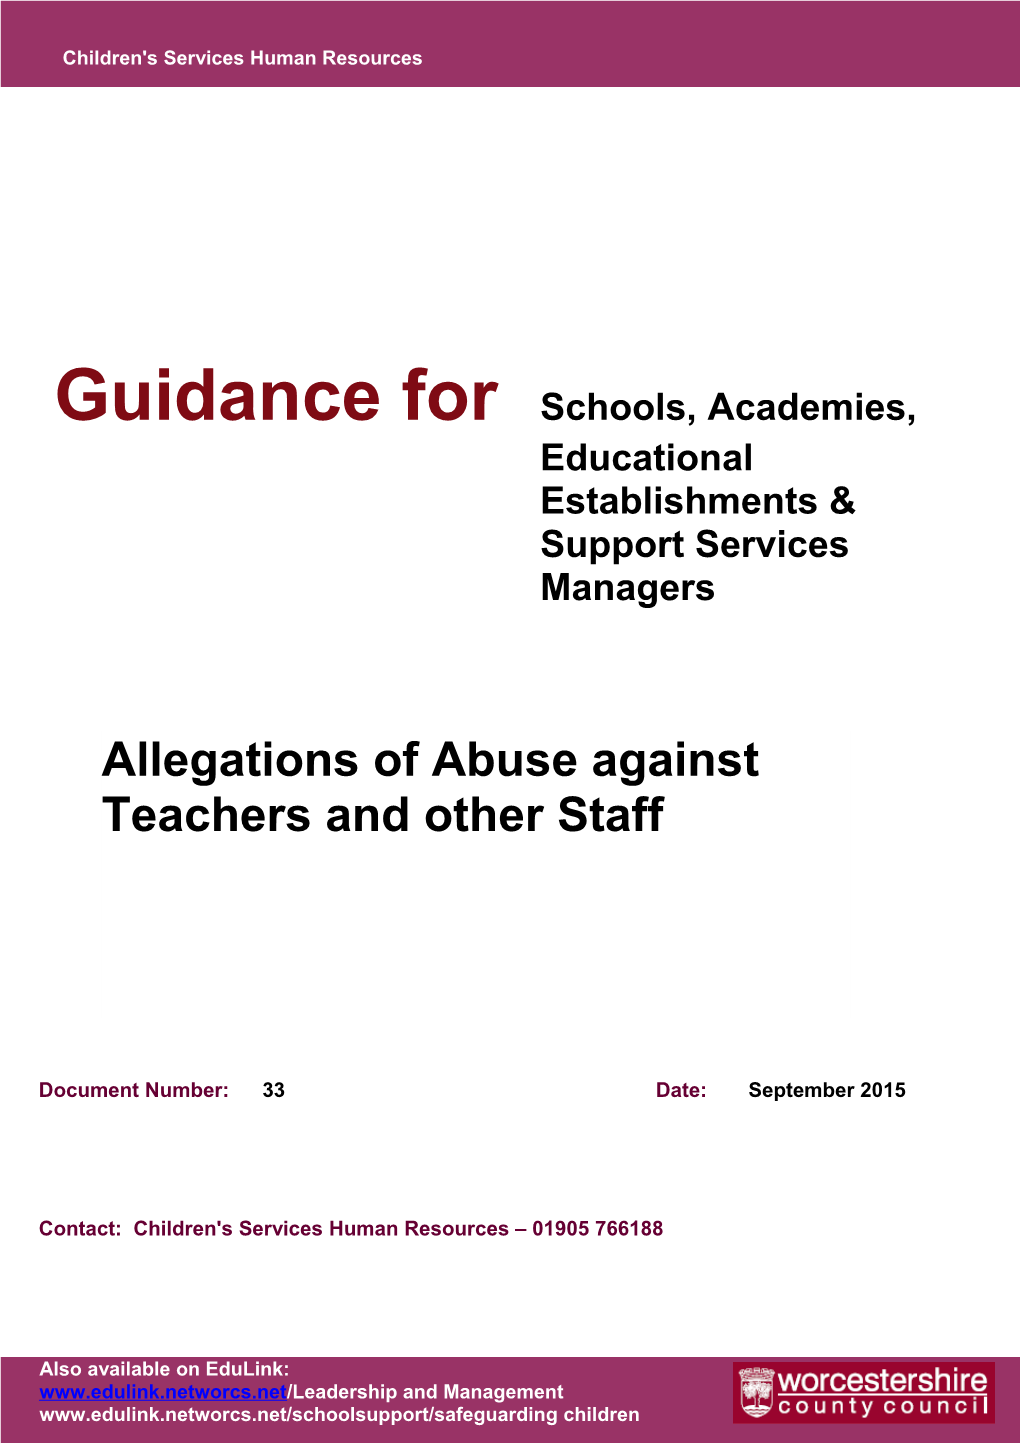 Allegations Of Abuse Against Teachers And Other Staff - Sept 2015